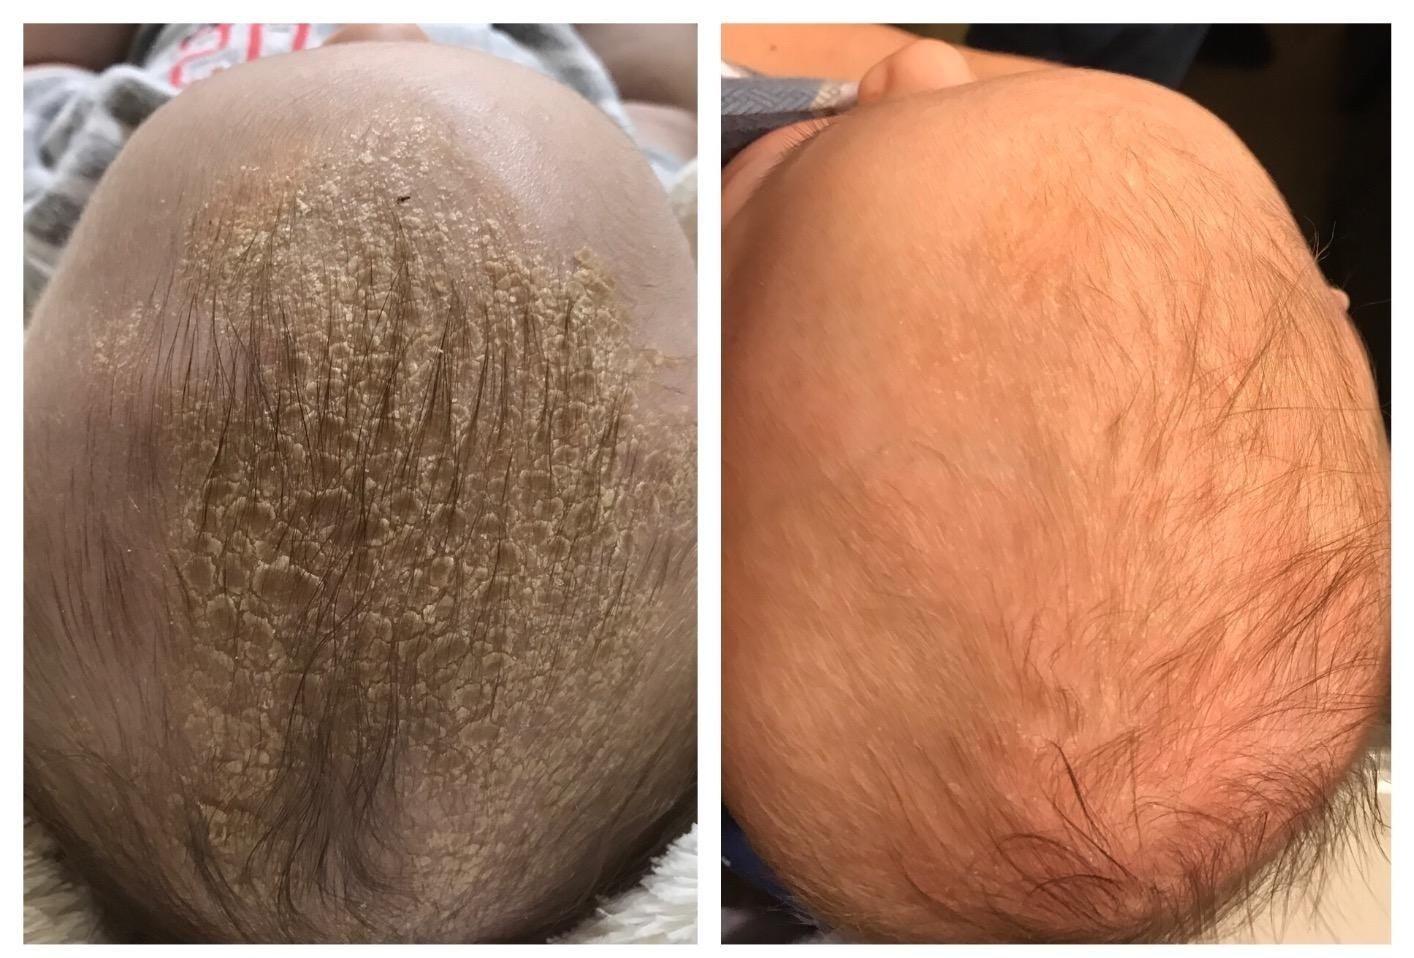 A baby&#x27;s head with dry scales on the left and the same baby&#x27;s head looking smoother and flake-free on the right